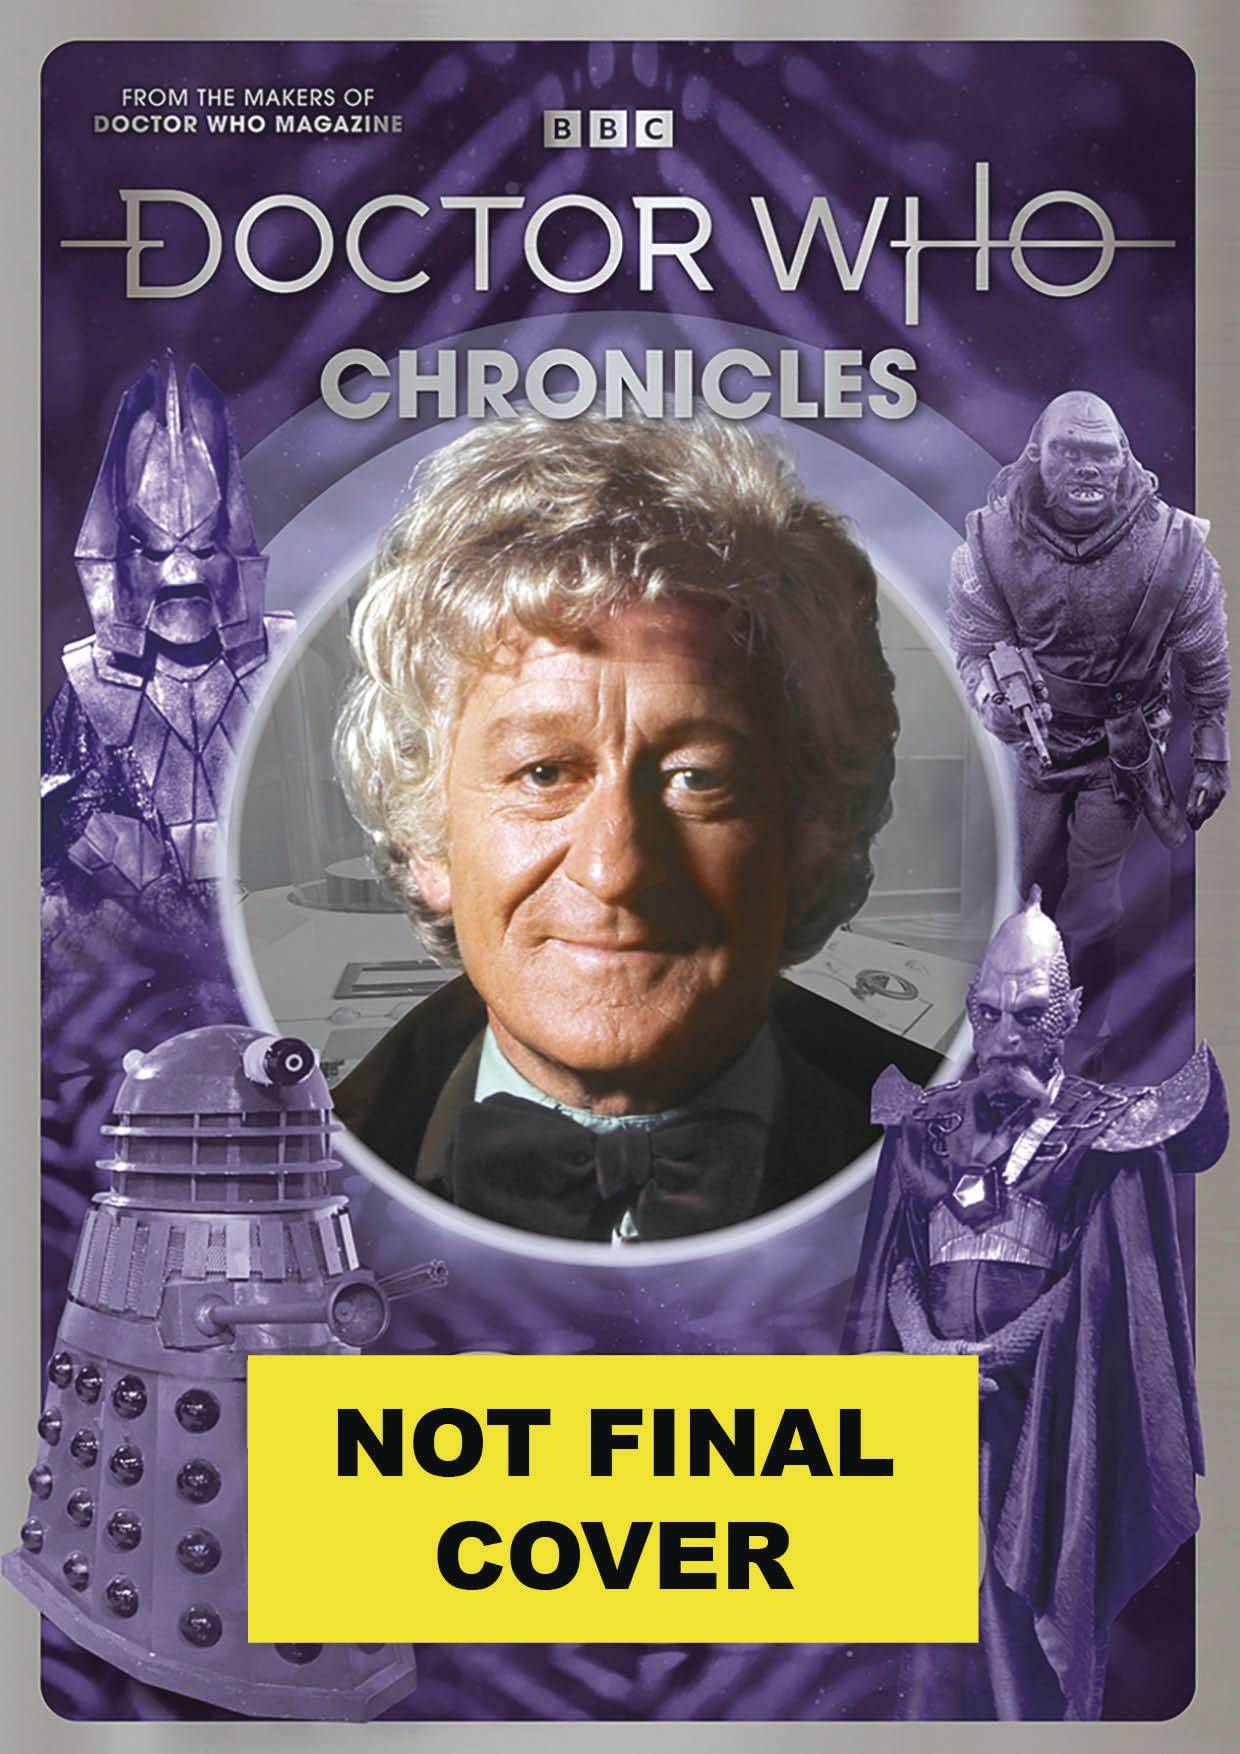 Doctor Who Chronicles Vol 07 (C: 0-1-1) (02/22/2023)